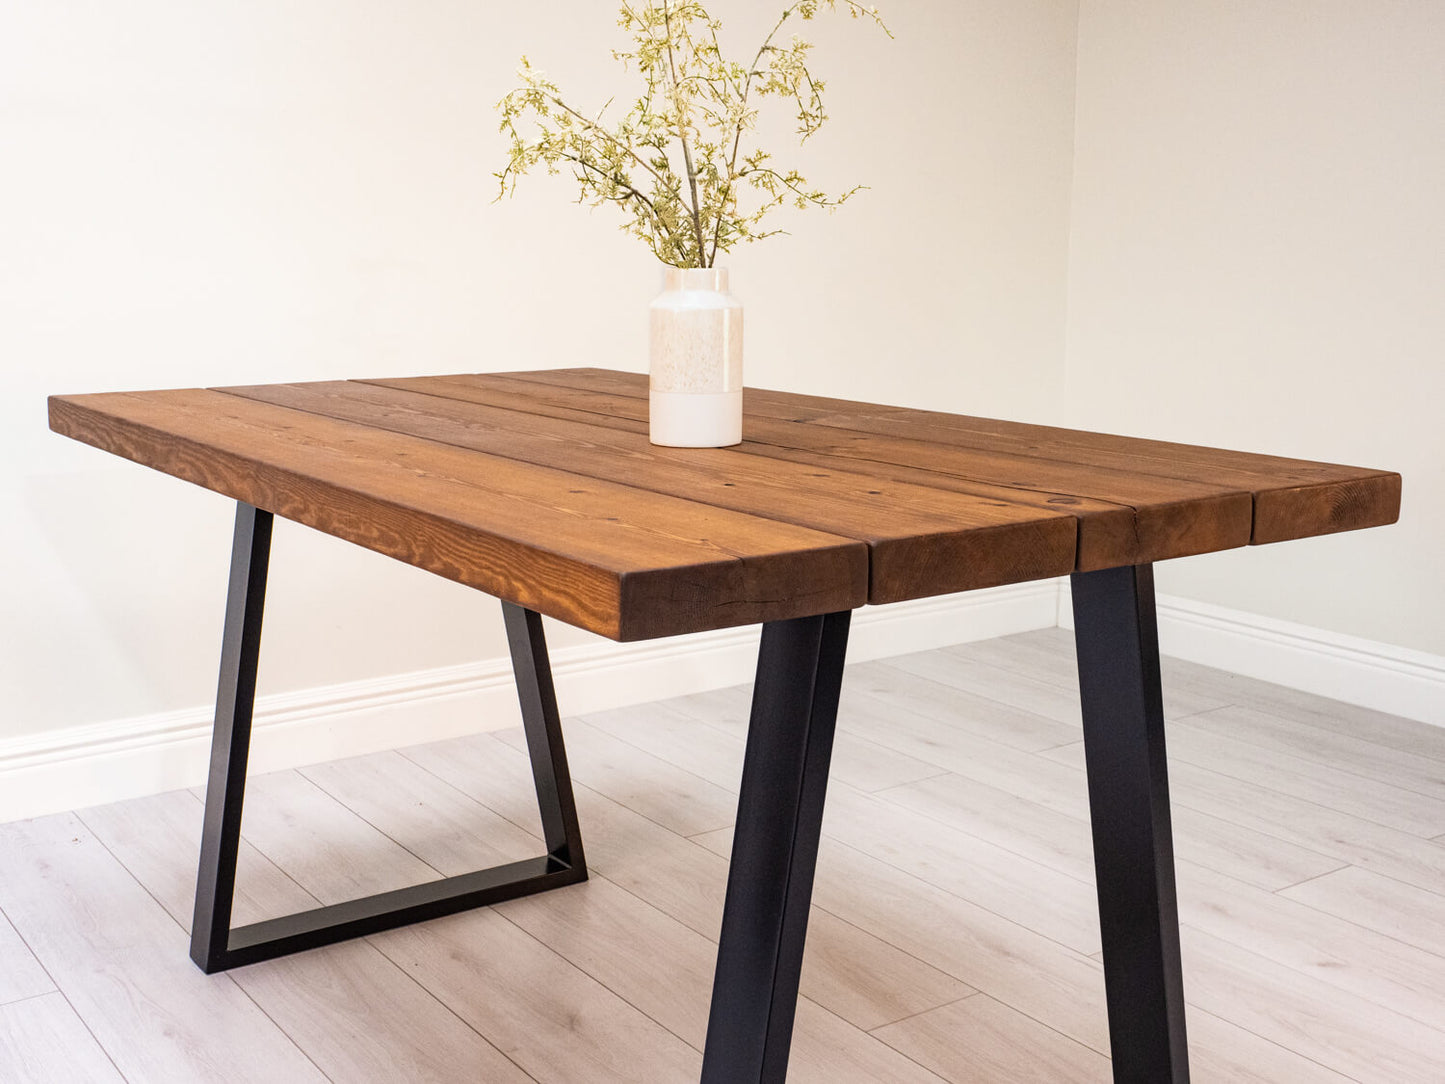 Rustic Wood Dining Table - Industrial Table legs